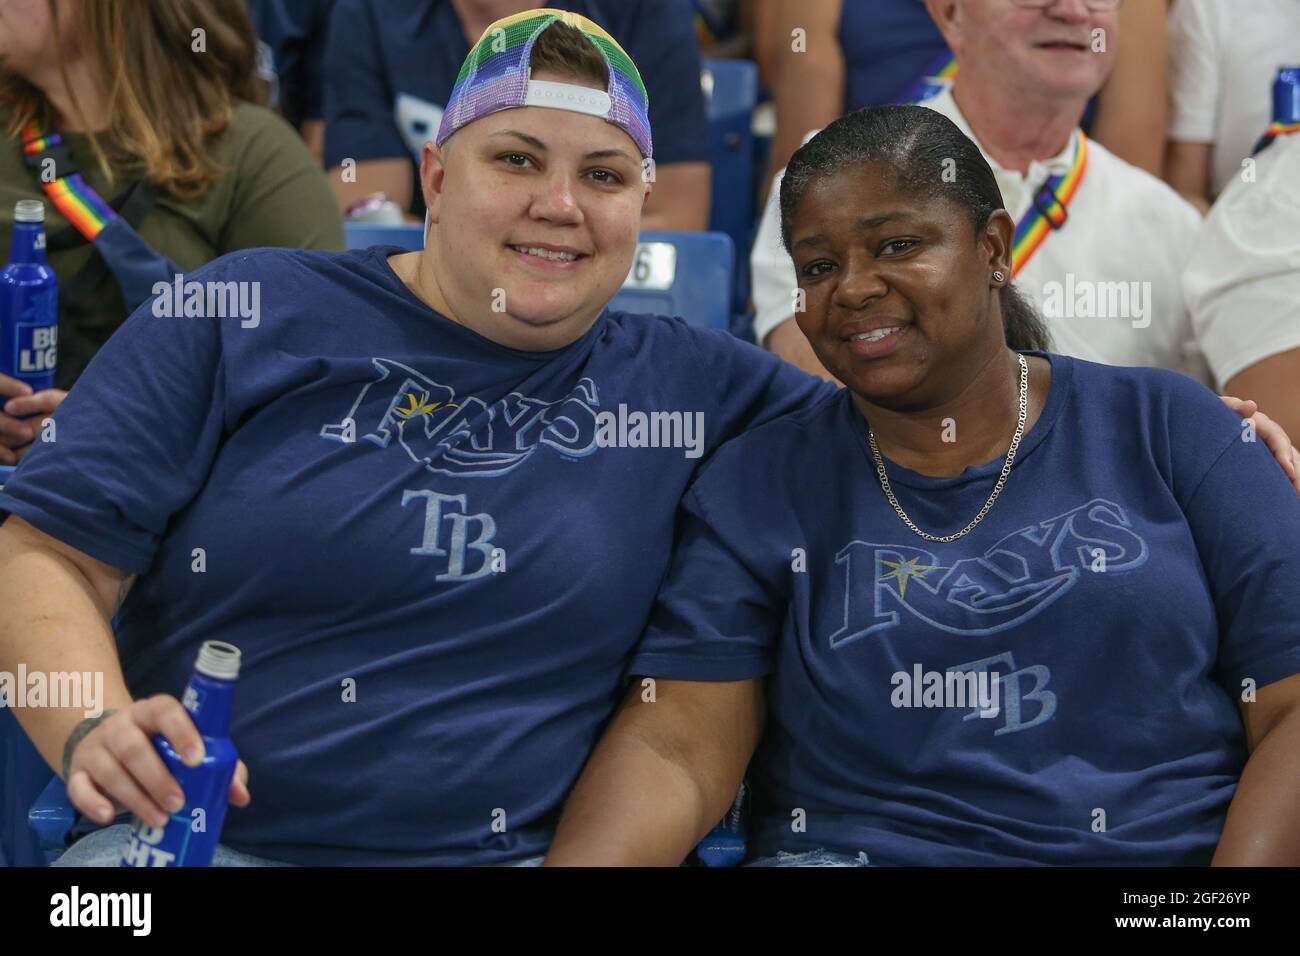 St. Petersburg, FL. USA; Tampa Bay Rays fans celebrating Pride Night at the  ball park during a major league baseball game against the Chicago White S  Stock Photo - Alamy